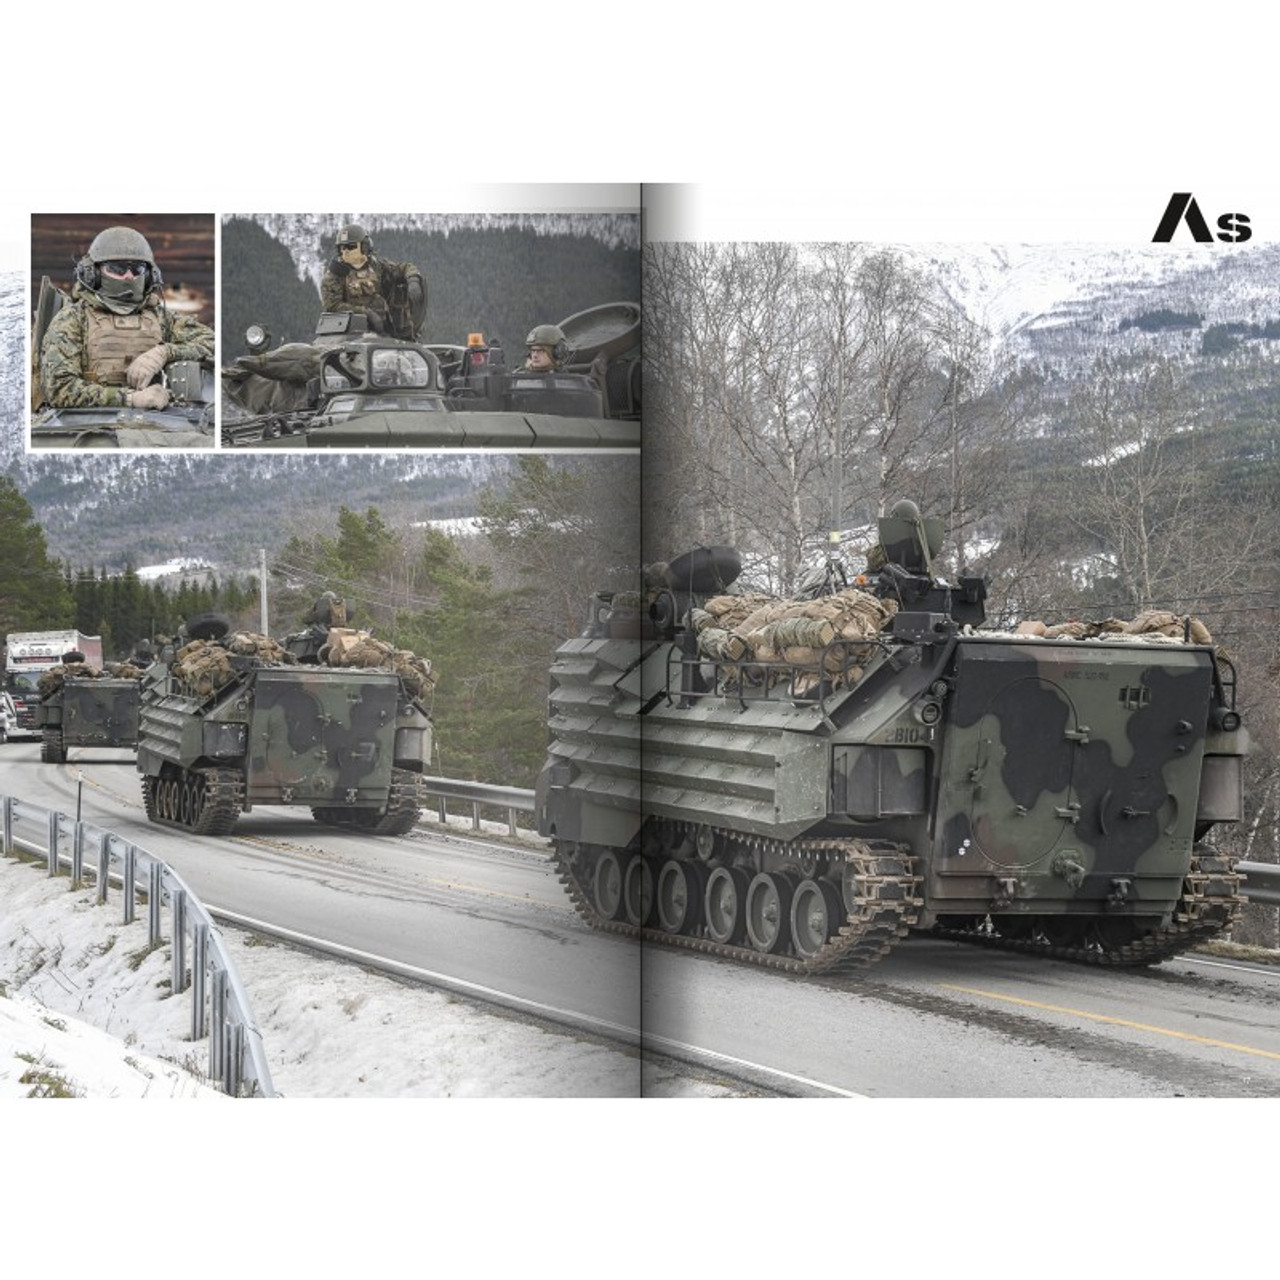 Abrams Squad References 04 - Marines, Vehicles of the 24th Marine Expeditionary Unit (MEA)